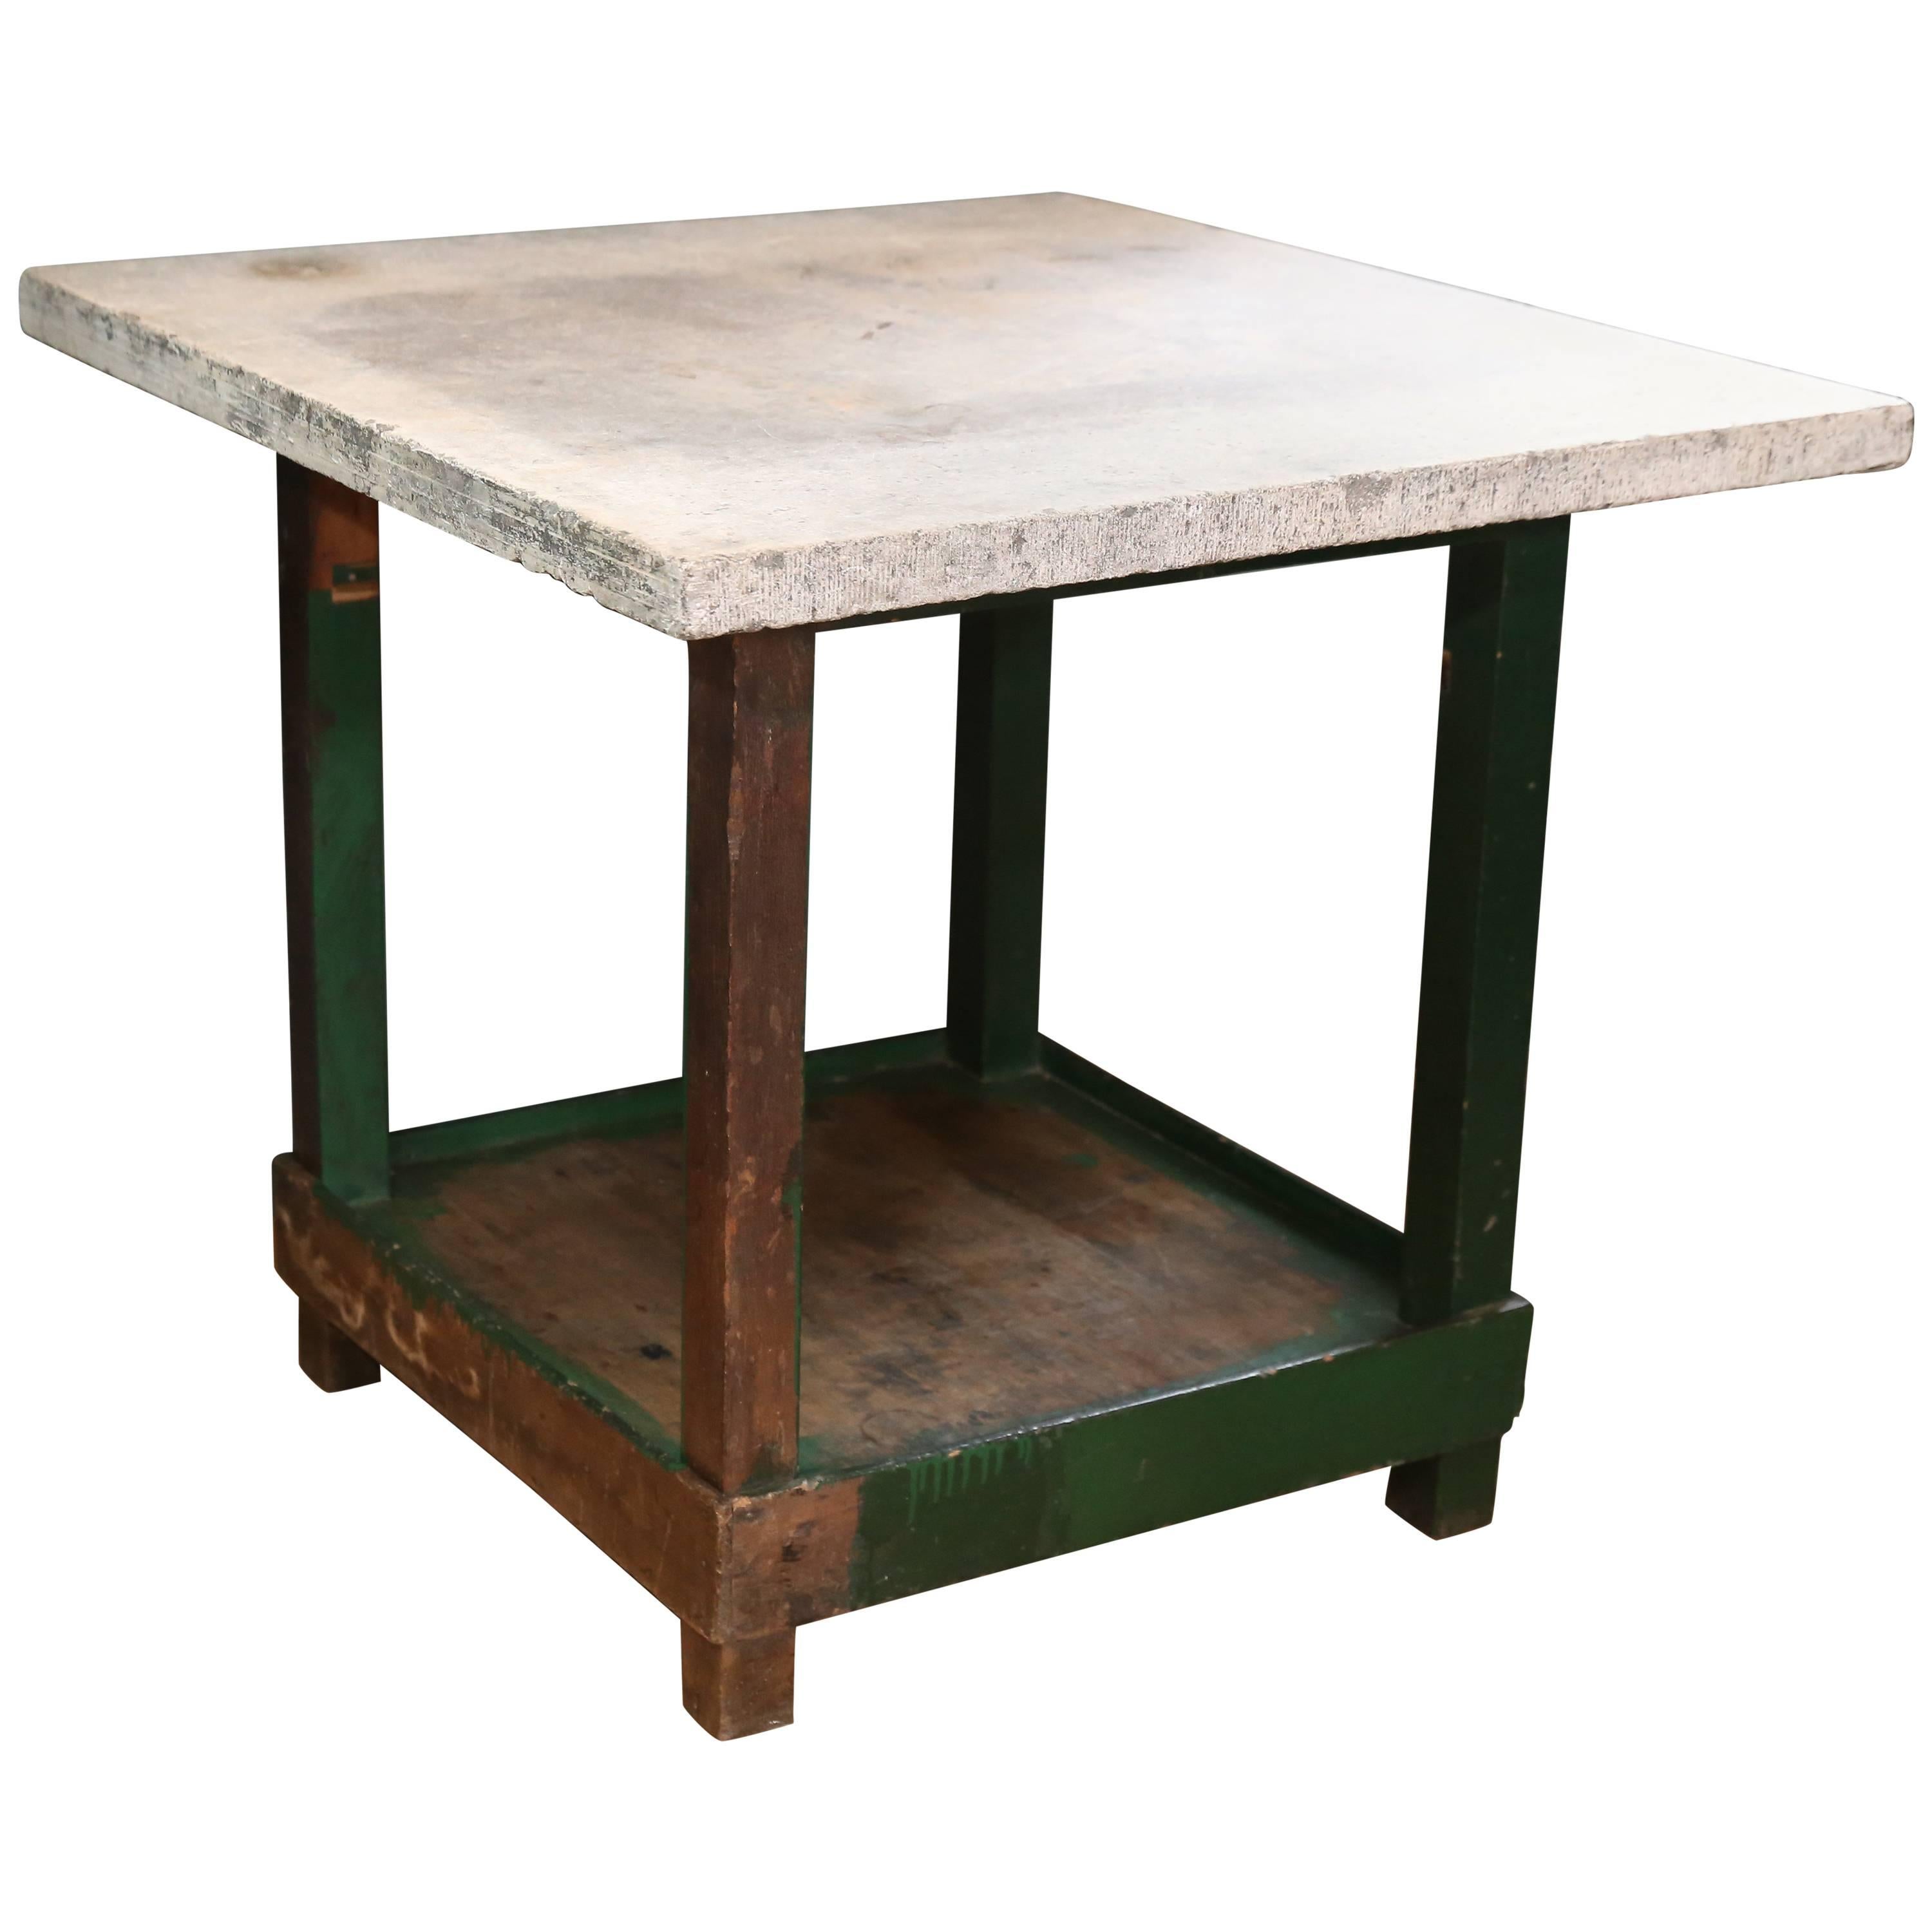 Tall Industrial Green Work Table with Bluestone Top from Belgium, circa 1940